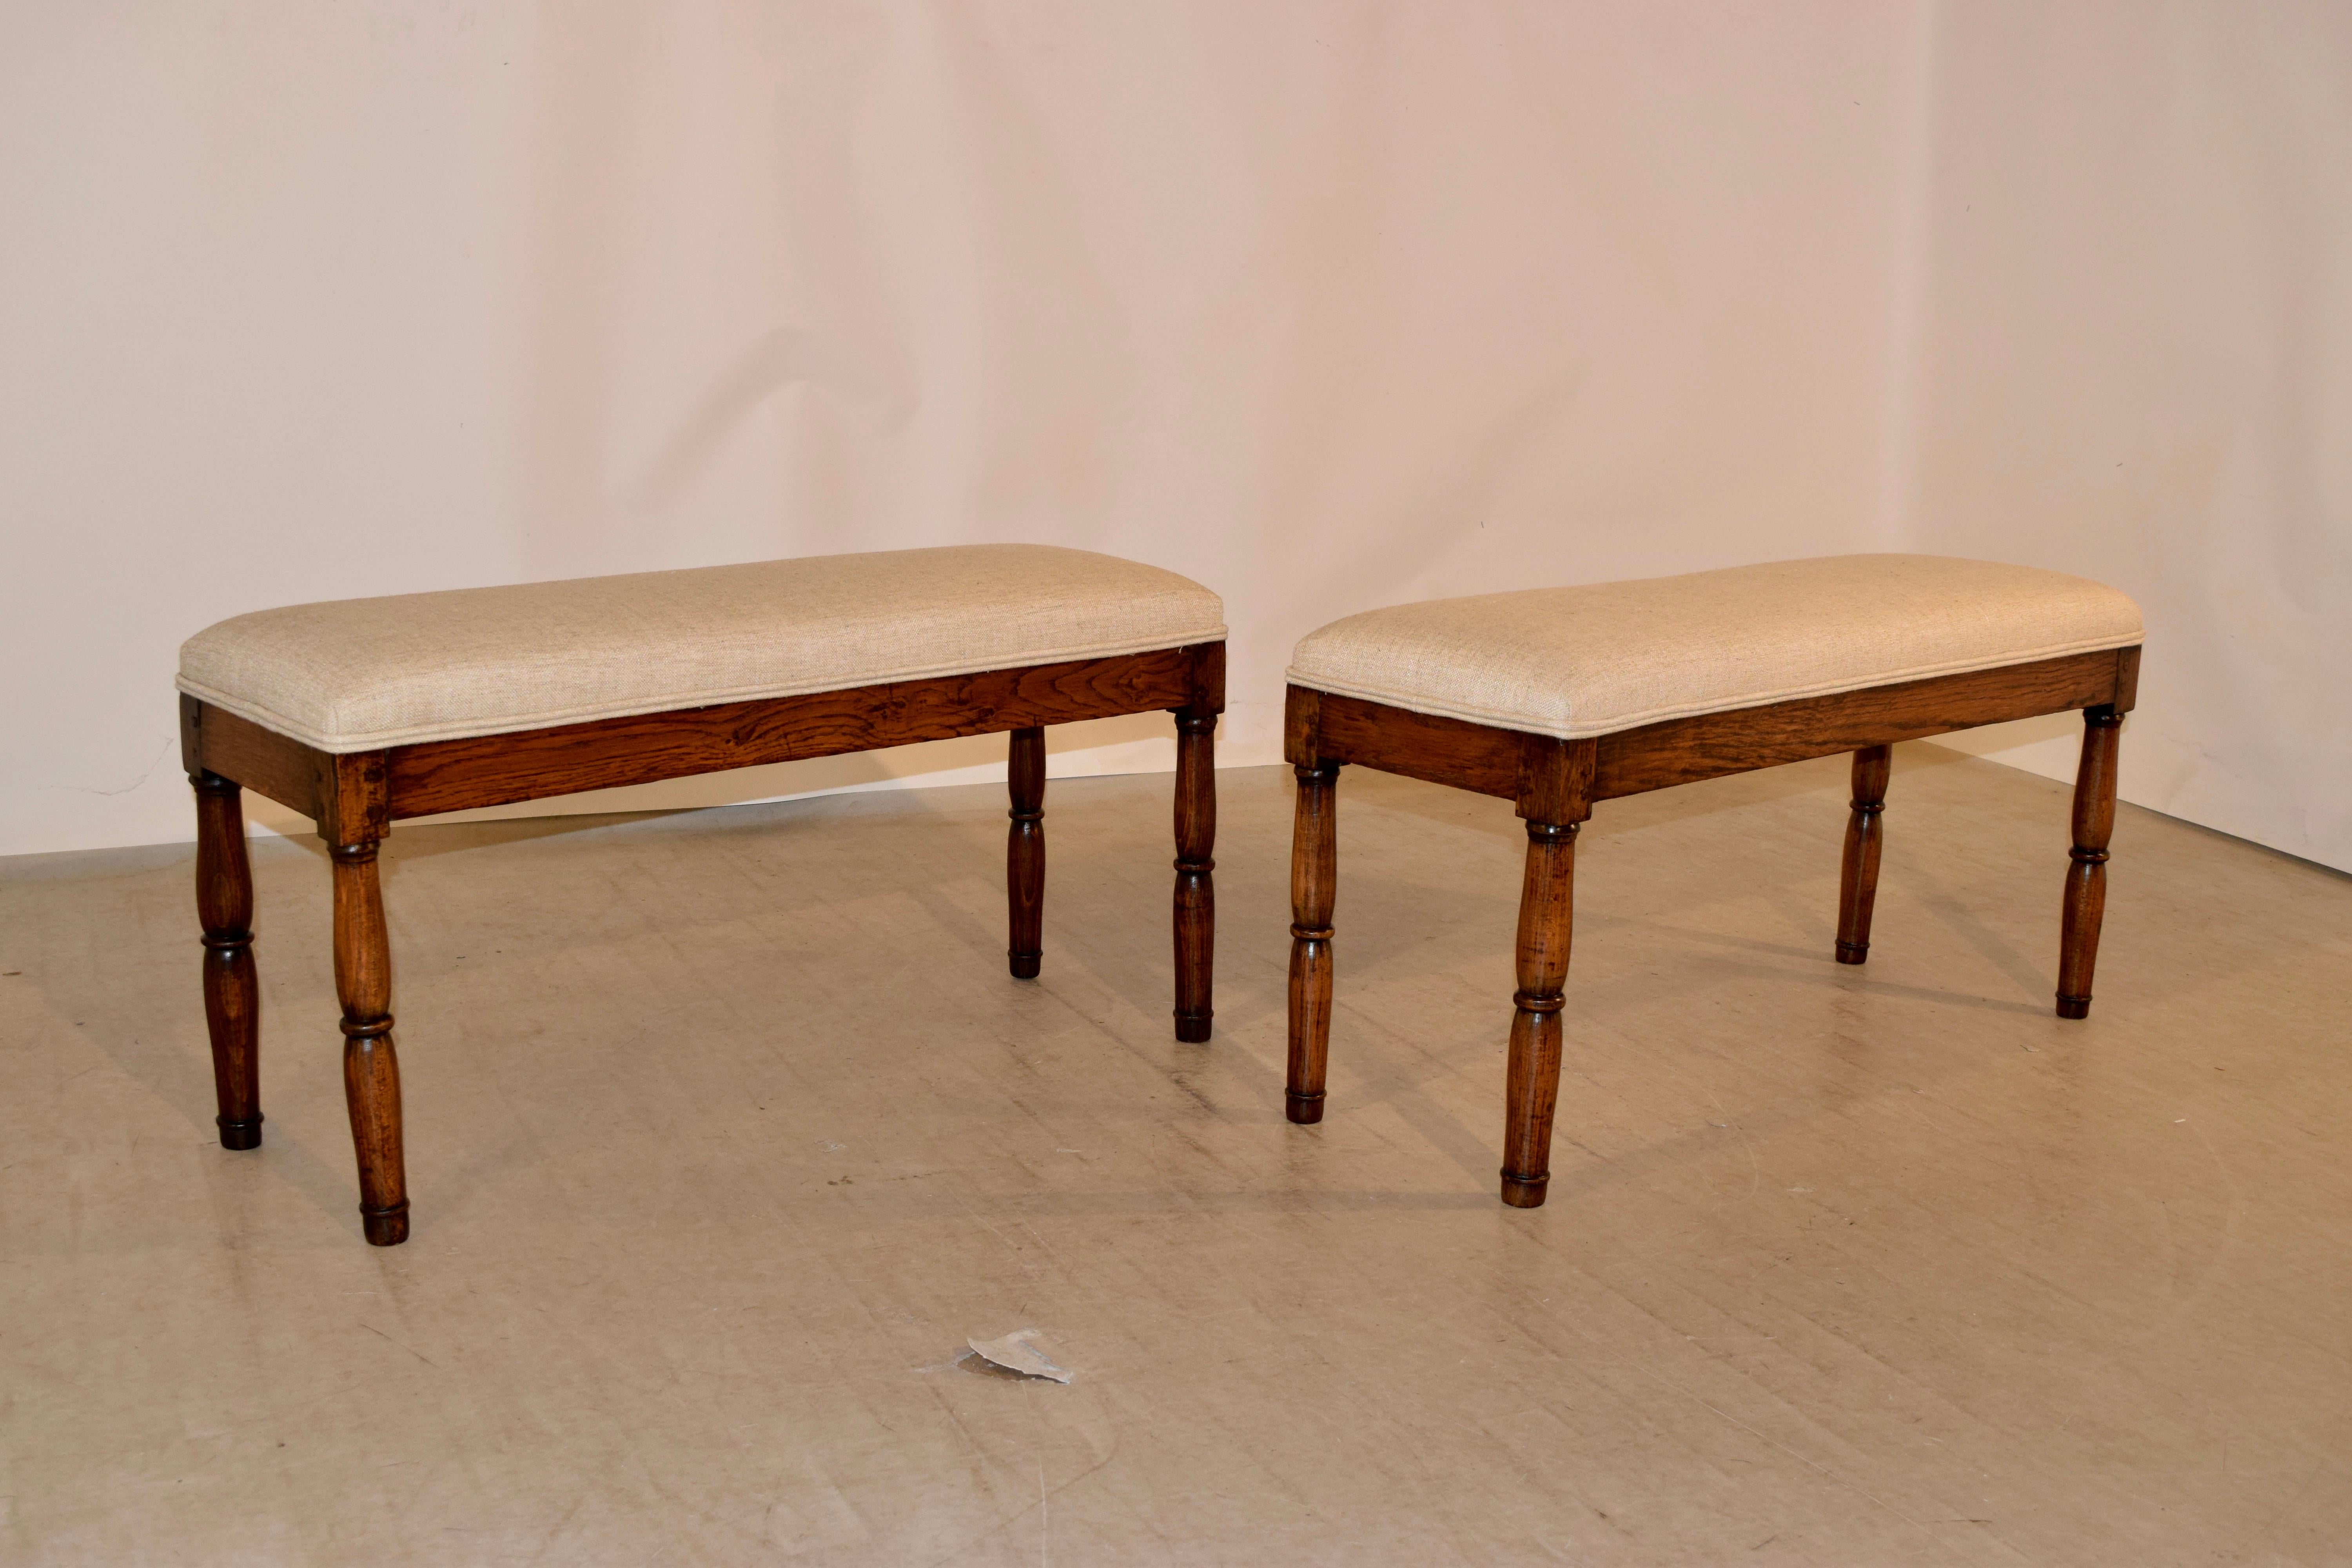 Early 19th century pair of oak benches from England newly upholstered in linen with double welt decoration. The legs are hand-turned and are lovely in form.